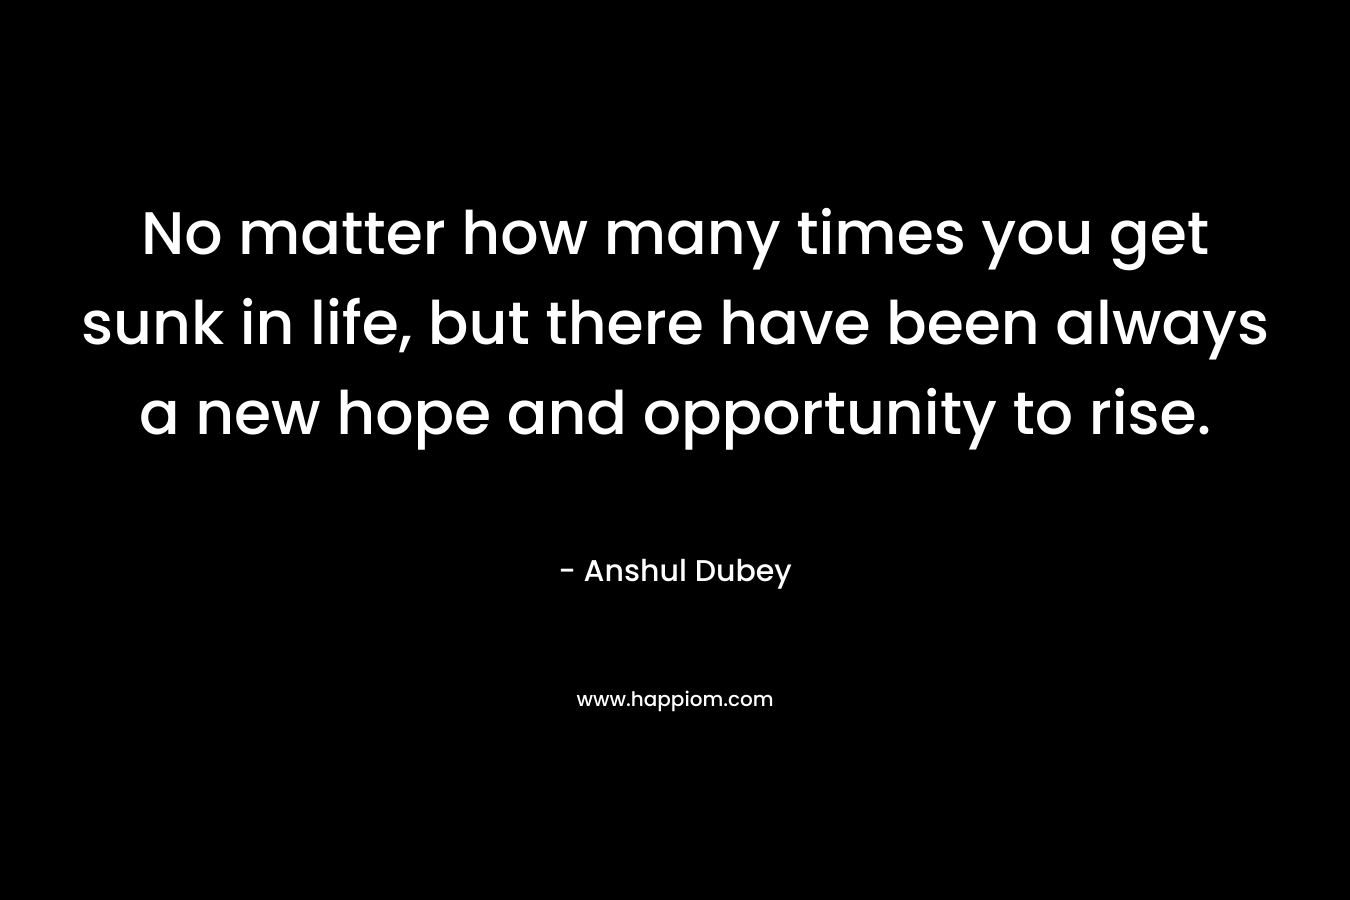 No matter how many times you get sunk in life, but there have been always a new hope and opportunity to rise. – Anshul Dubey